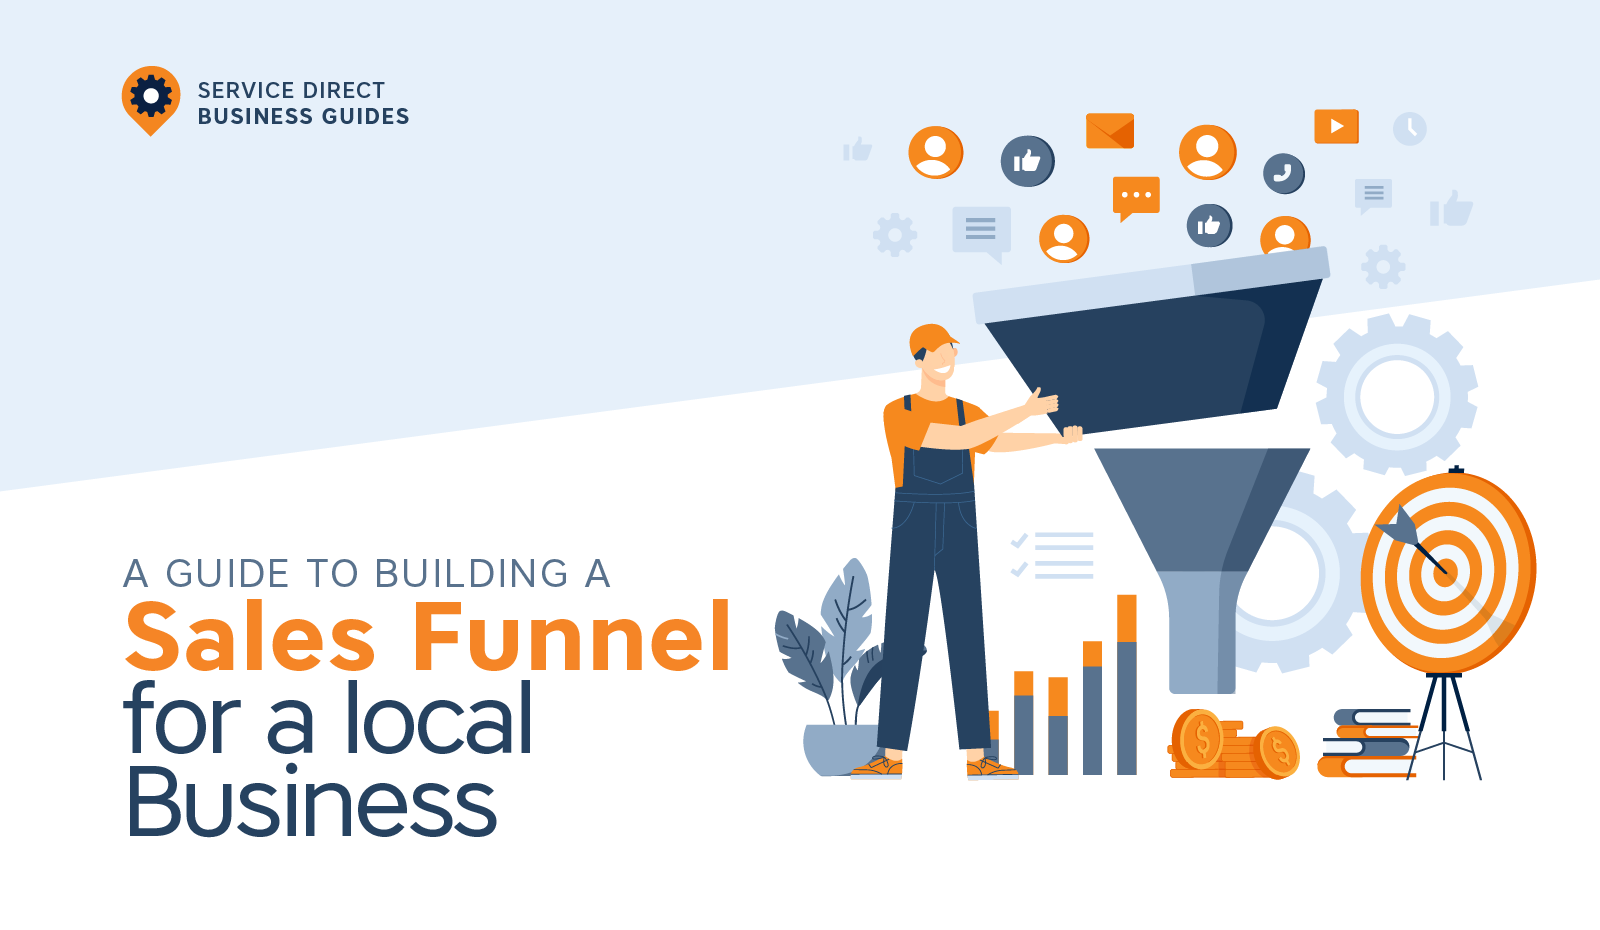 A Guide to Building a Sales Funnel for a Local Business